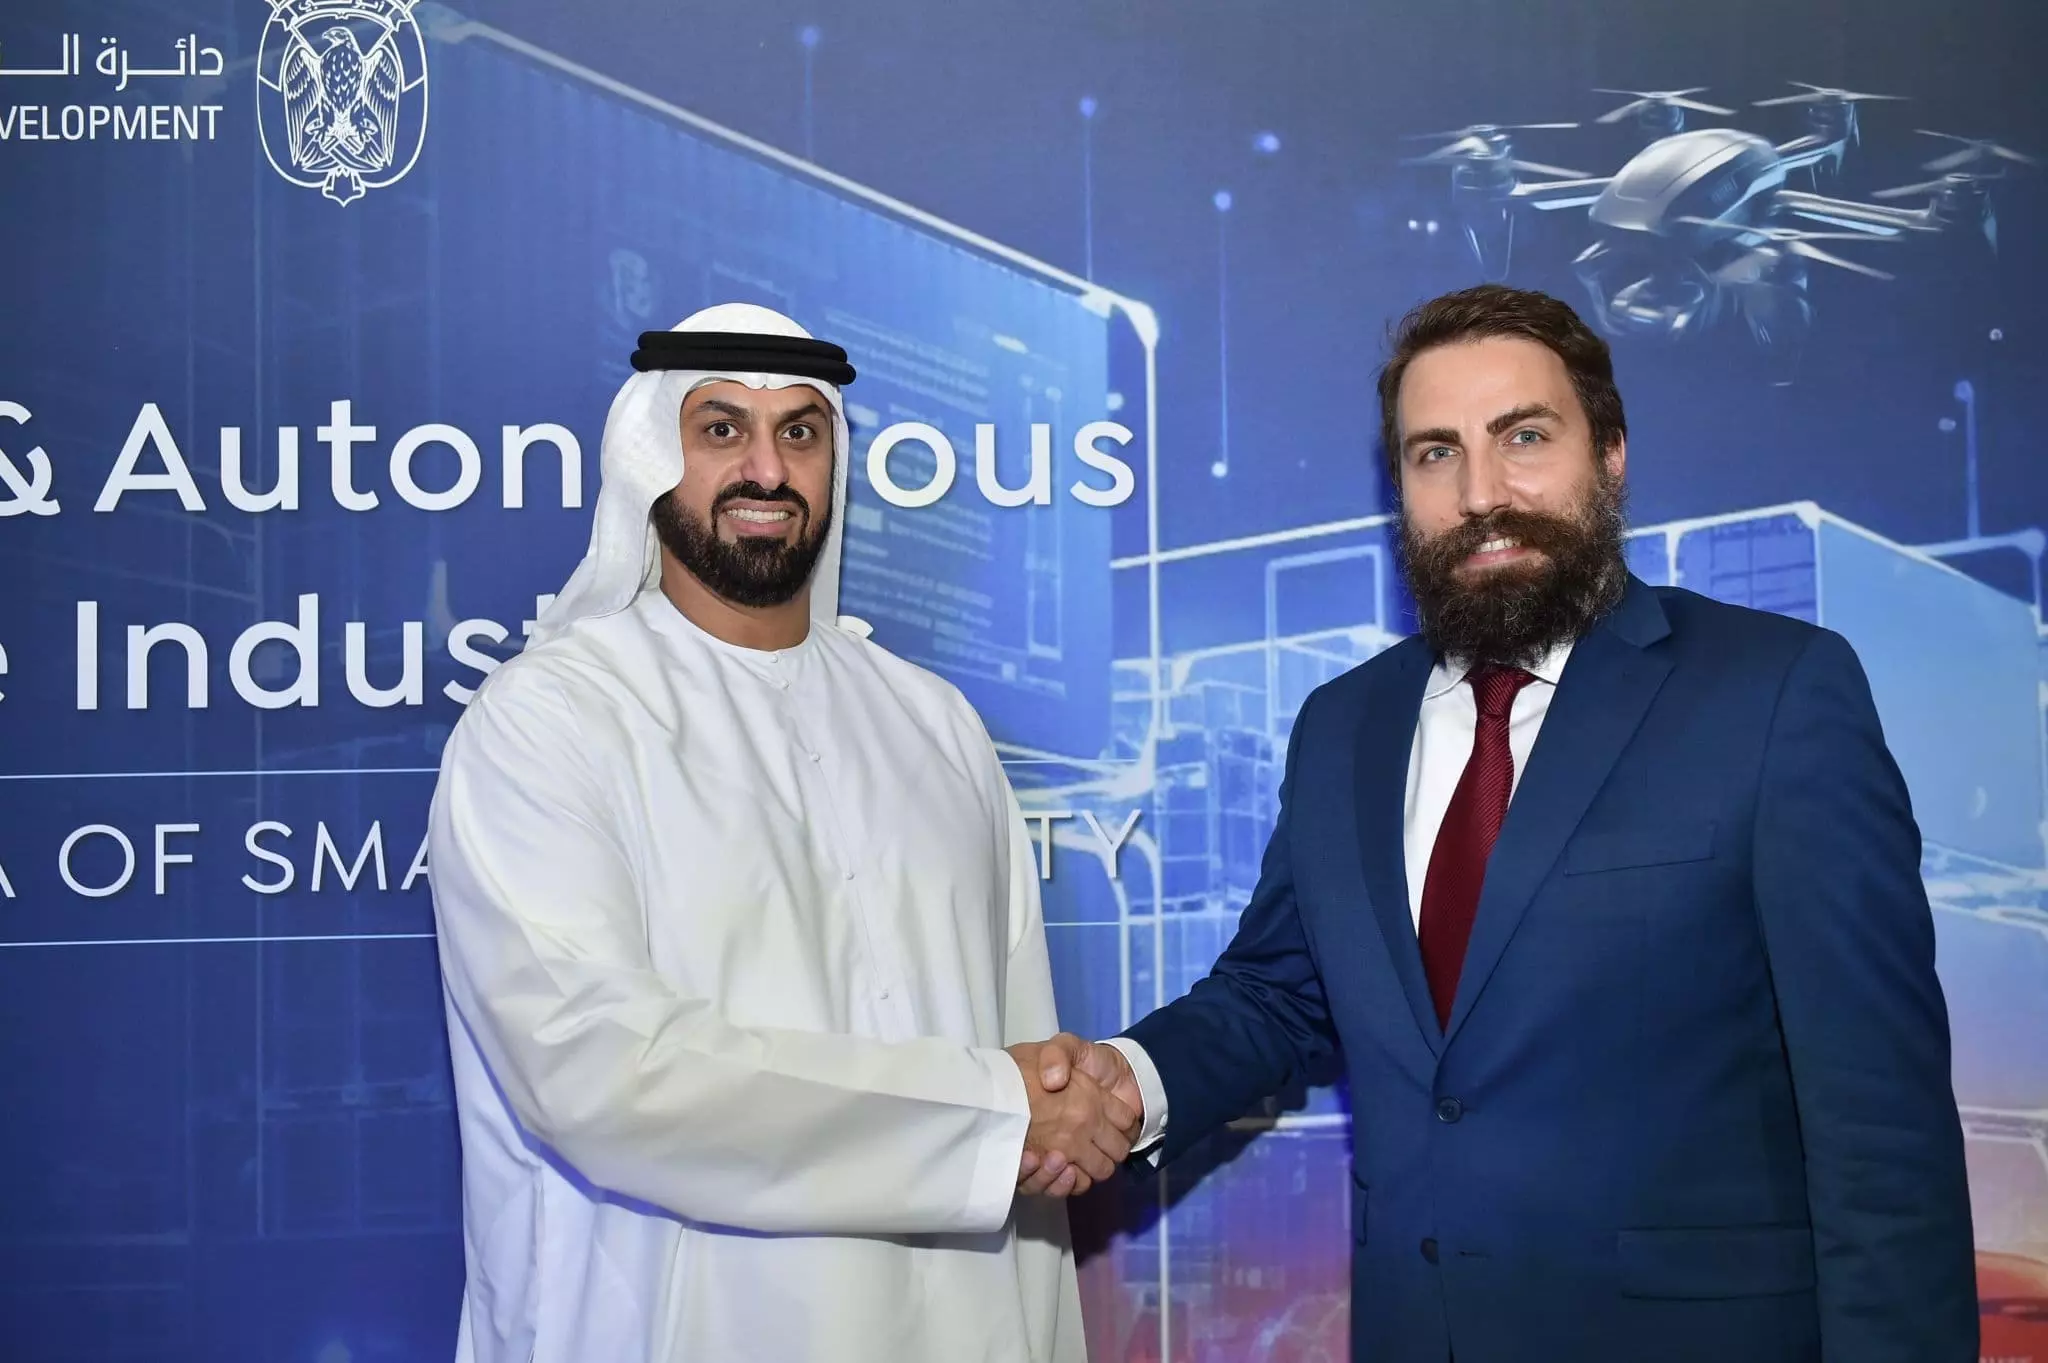 (From left): Abdulla Mohammed Alashram, Group CEO, Emirates Post Group and Svilen Rangelov, CEO and Co-Founder, Dronamics.